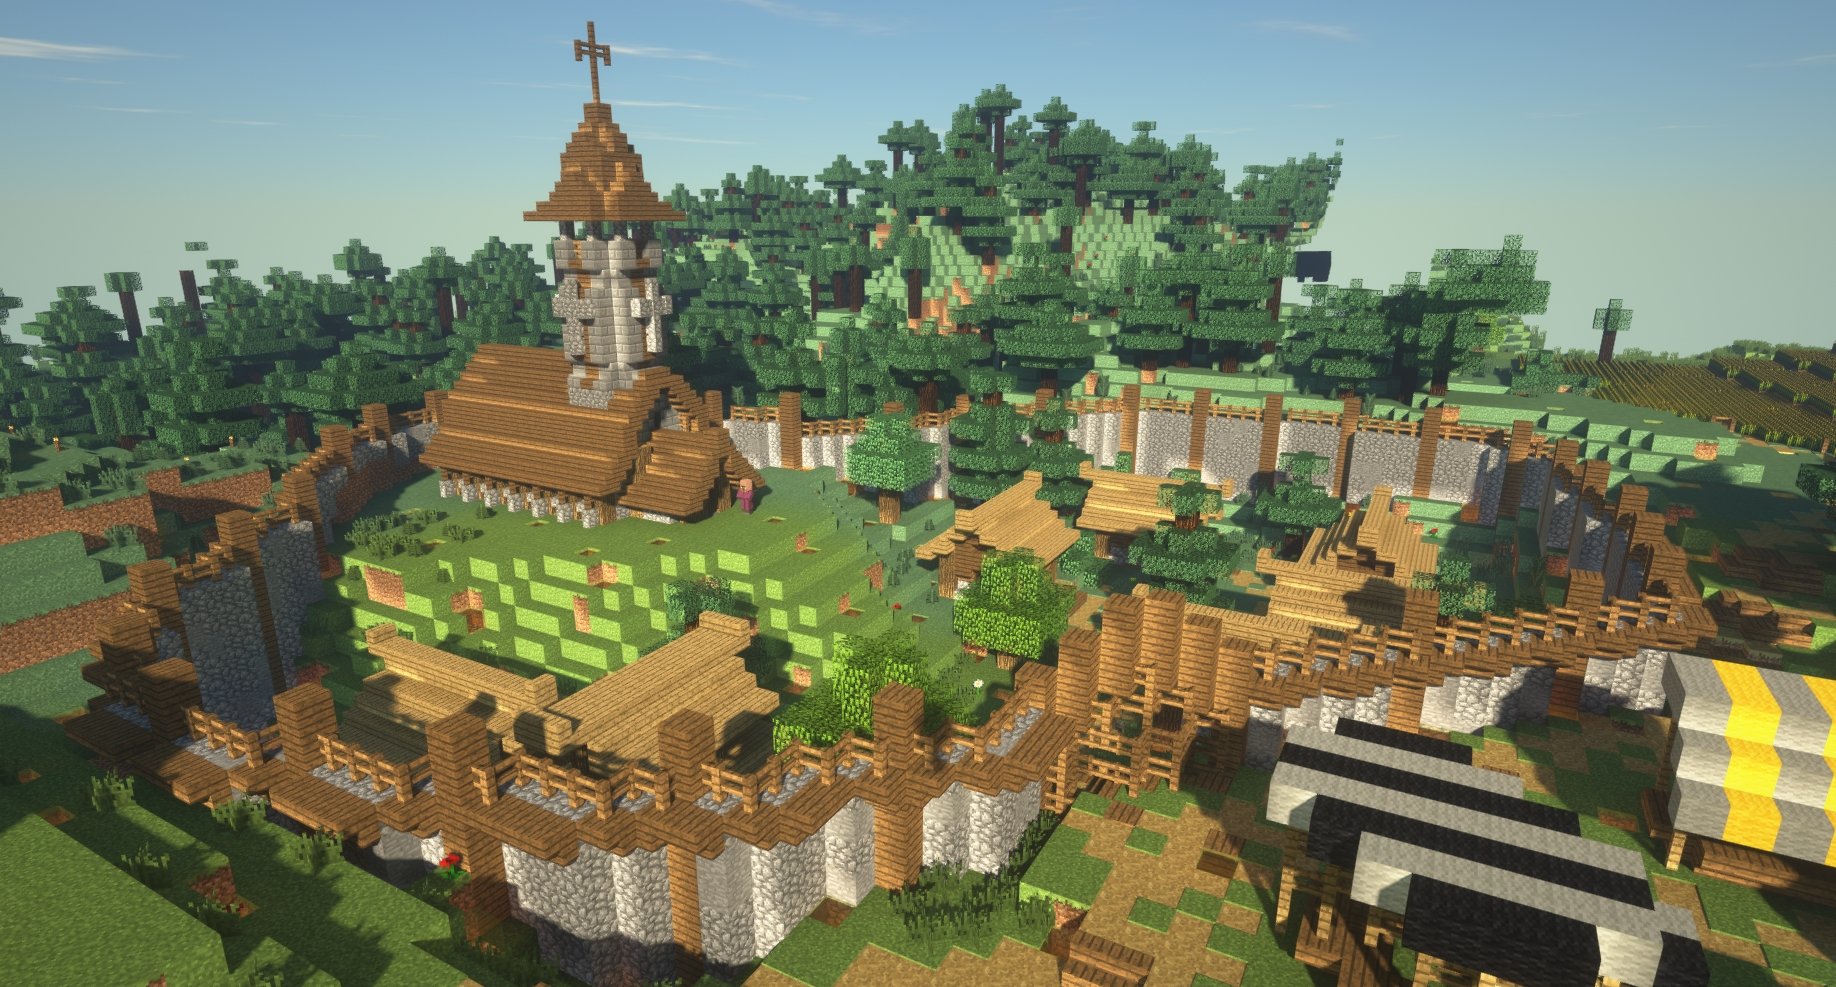 Kaoshkraft Network Pe Twitter This Week S Survival Showcase Goes To Grizzlymd And Bubbles4lyfe Check Out Their Awesome Medieval Style Build Minecraft Kkserver Build Survival Medieval Castle T Co Gqdxhujtwf Twitter